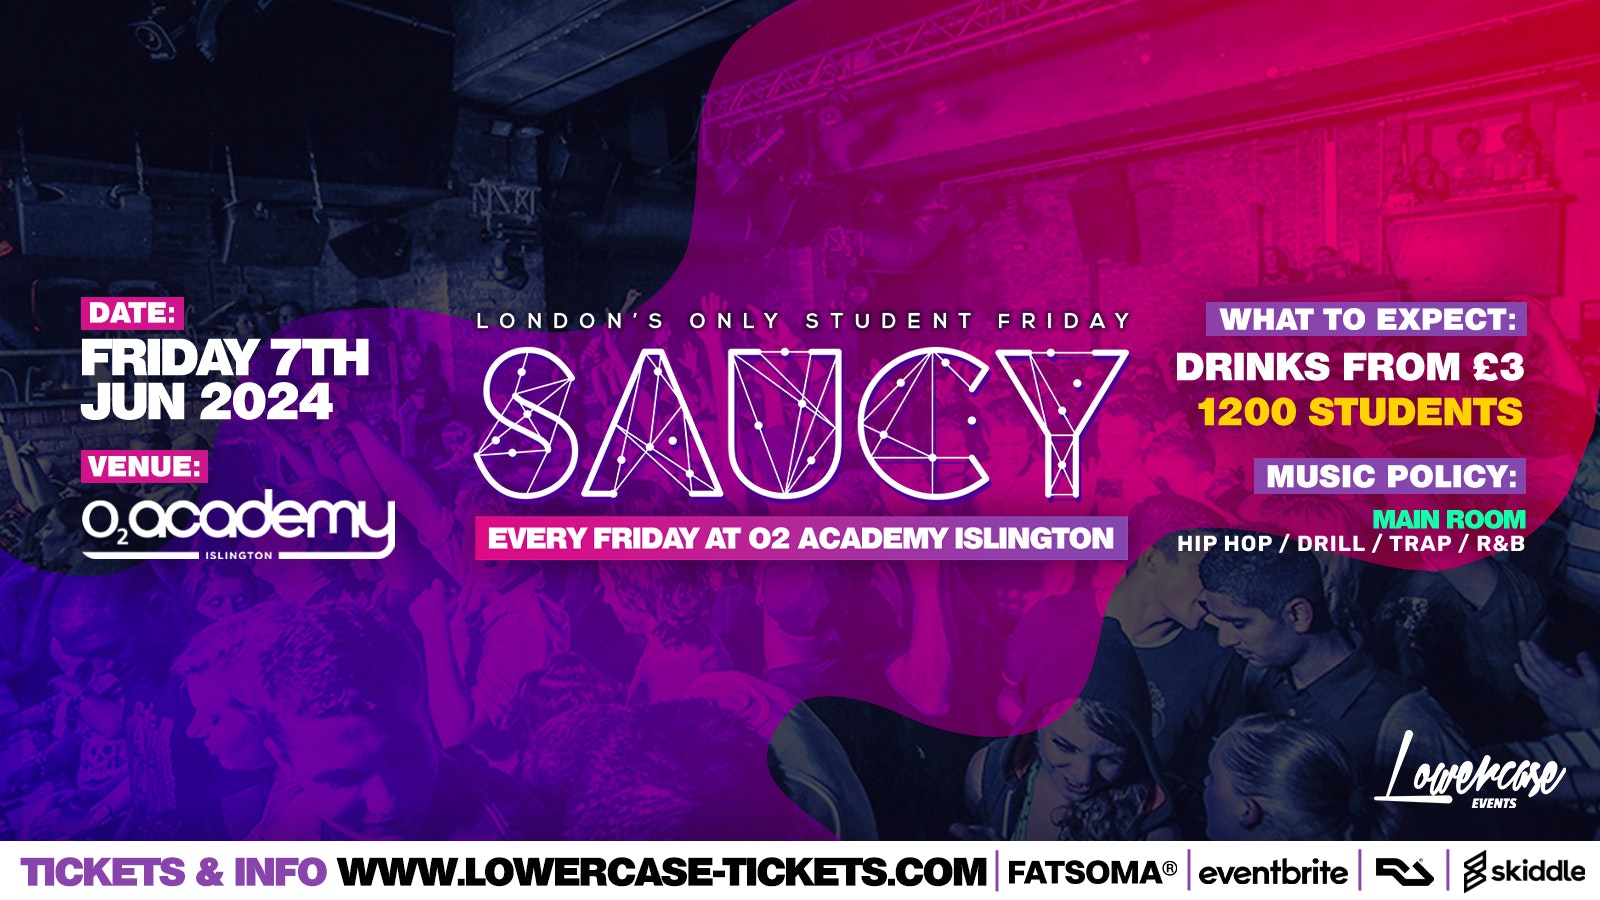 END OF YEAR FINALÉ – Saucy Fridays 🎉 – London’s Biggest Weekly Student Friday At O2 Academy Islington ft DJ AR